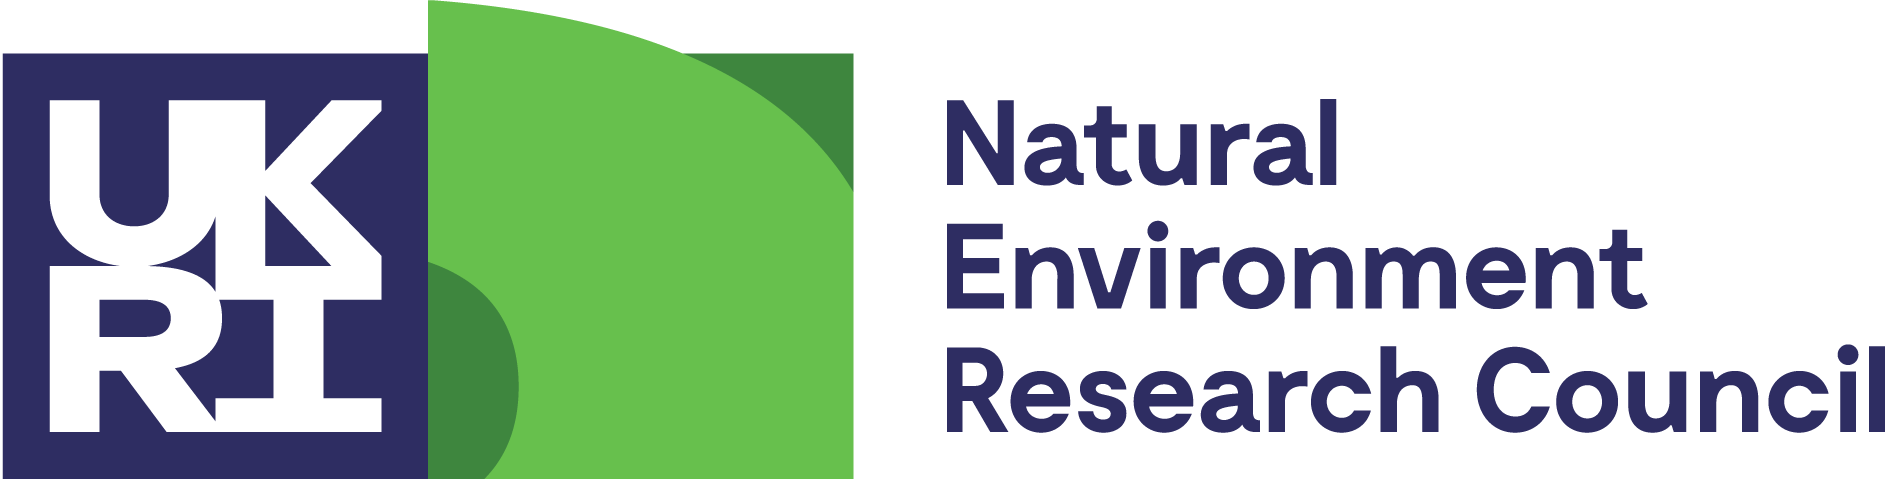 national environment reasearch council